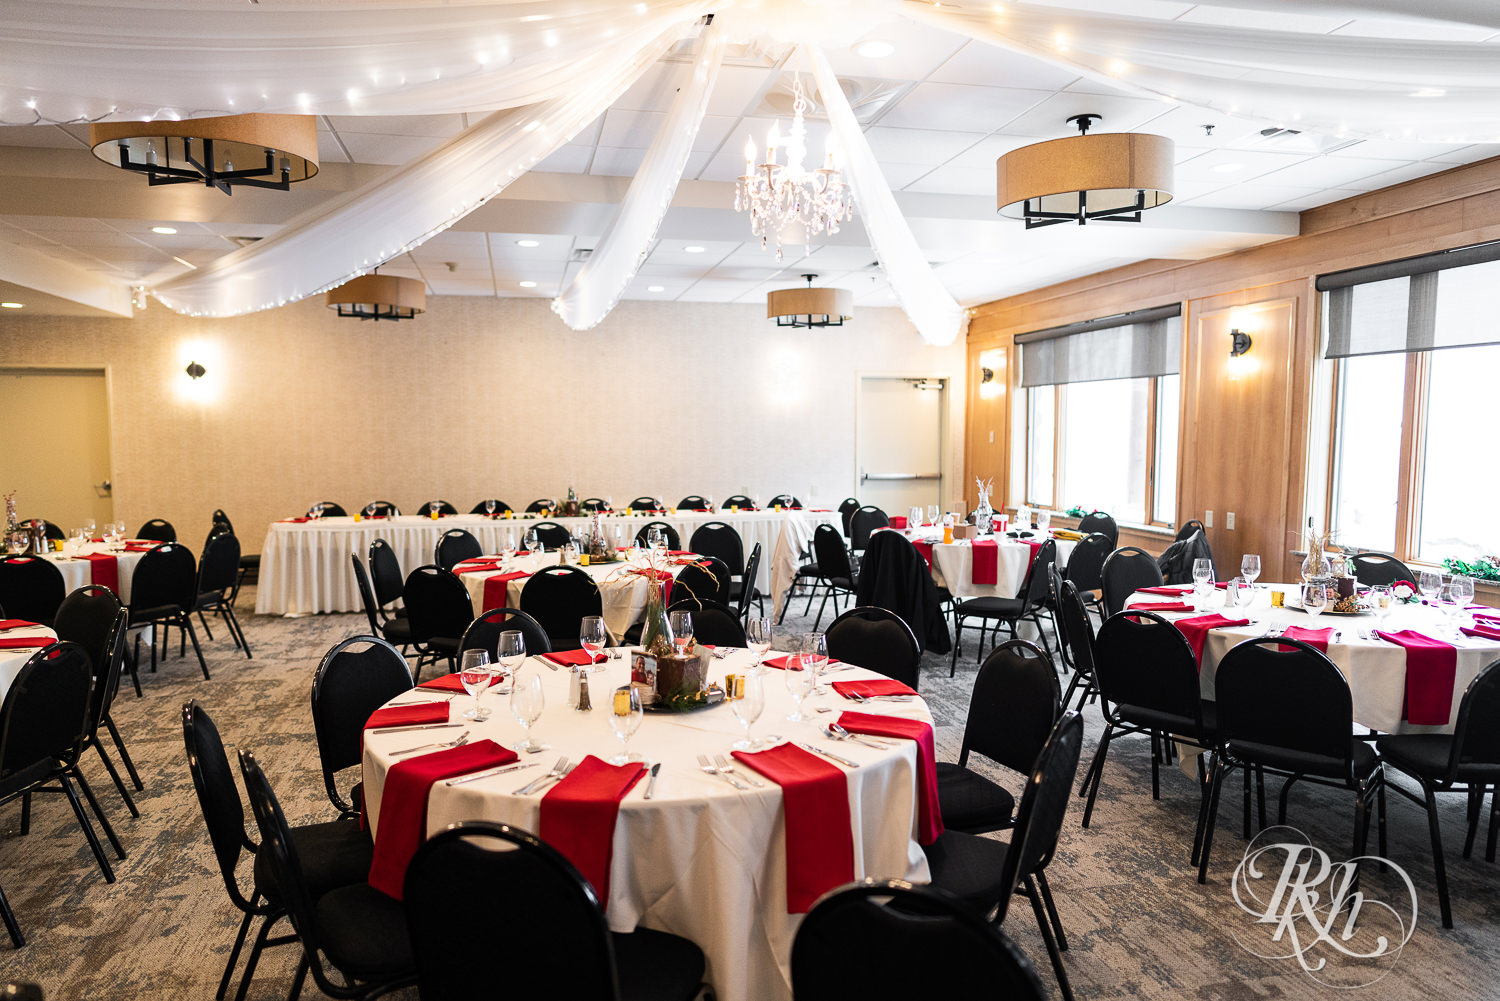 Winter wedding reception setup at Grand Superior Lodge in Two Harbors, Minnesota.